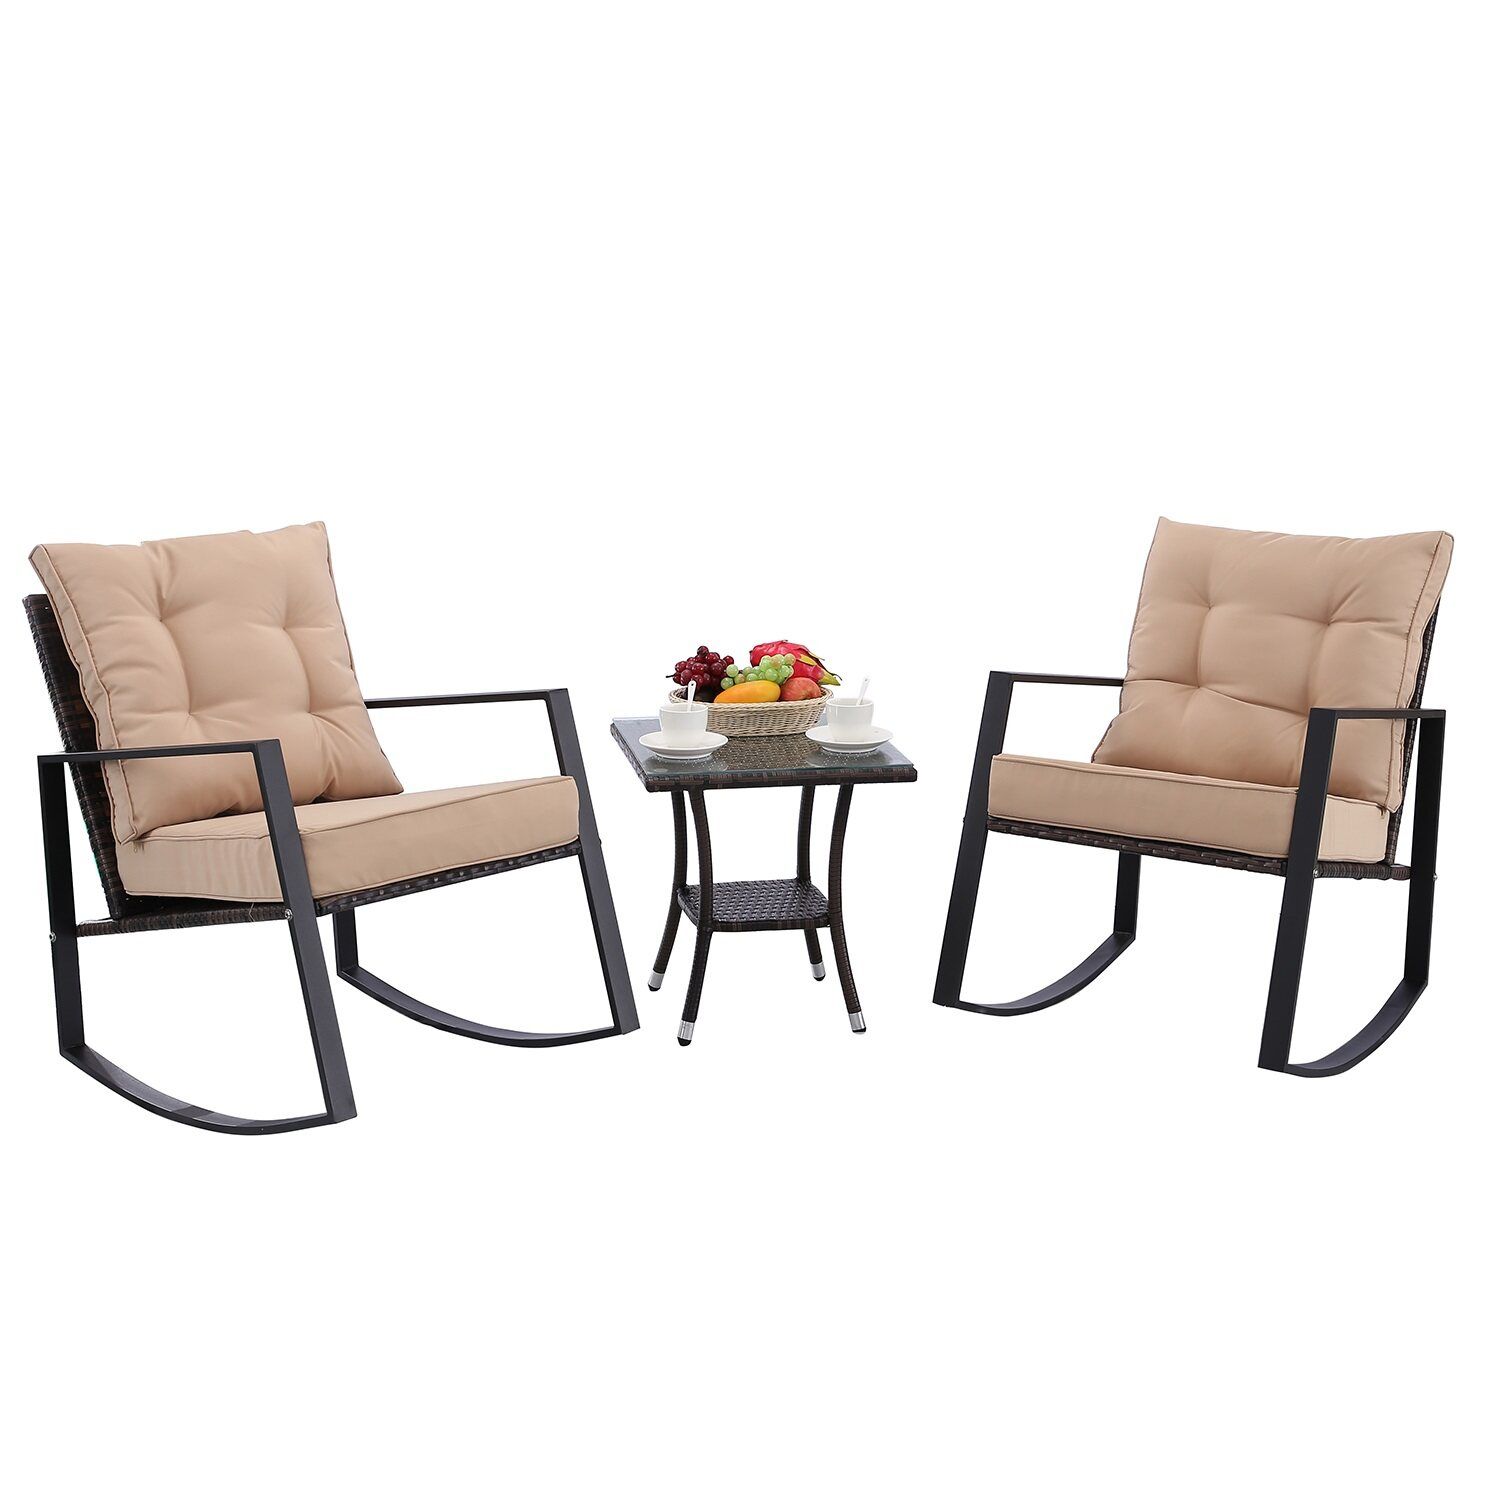 Htth 3 Pieces Outdoor Rocking Chair Bistro Set Steel Furniture With Throughout Outdoor Rocking Chair Sets With Coffee Table (View 1 of 15)